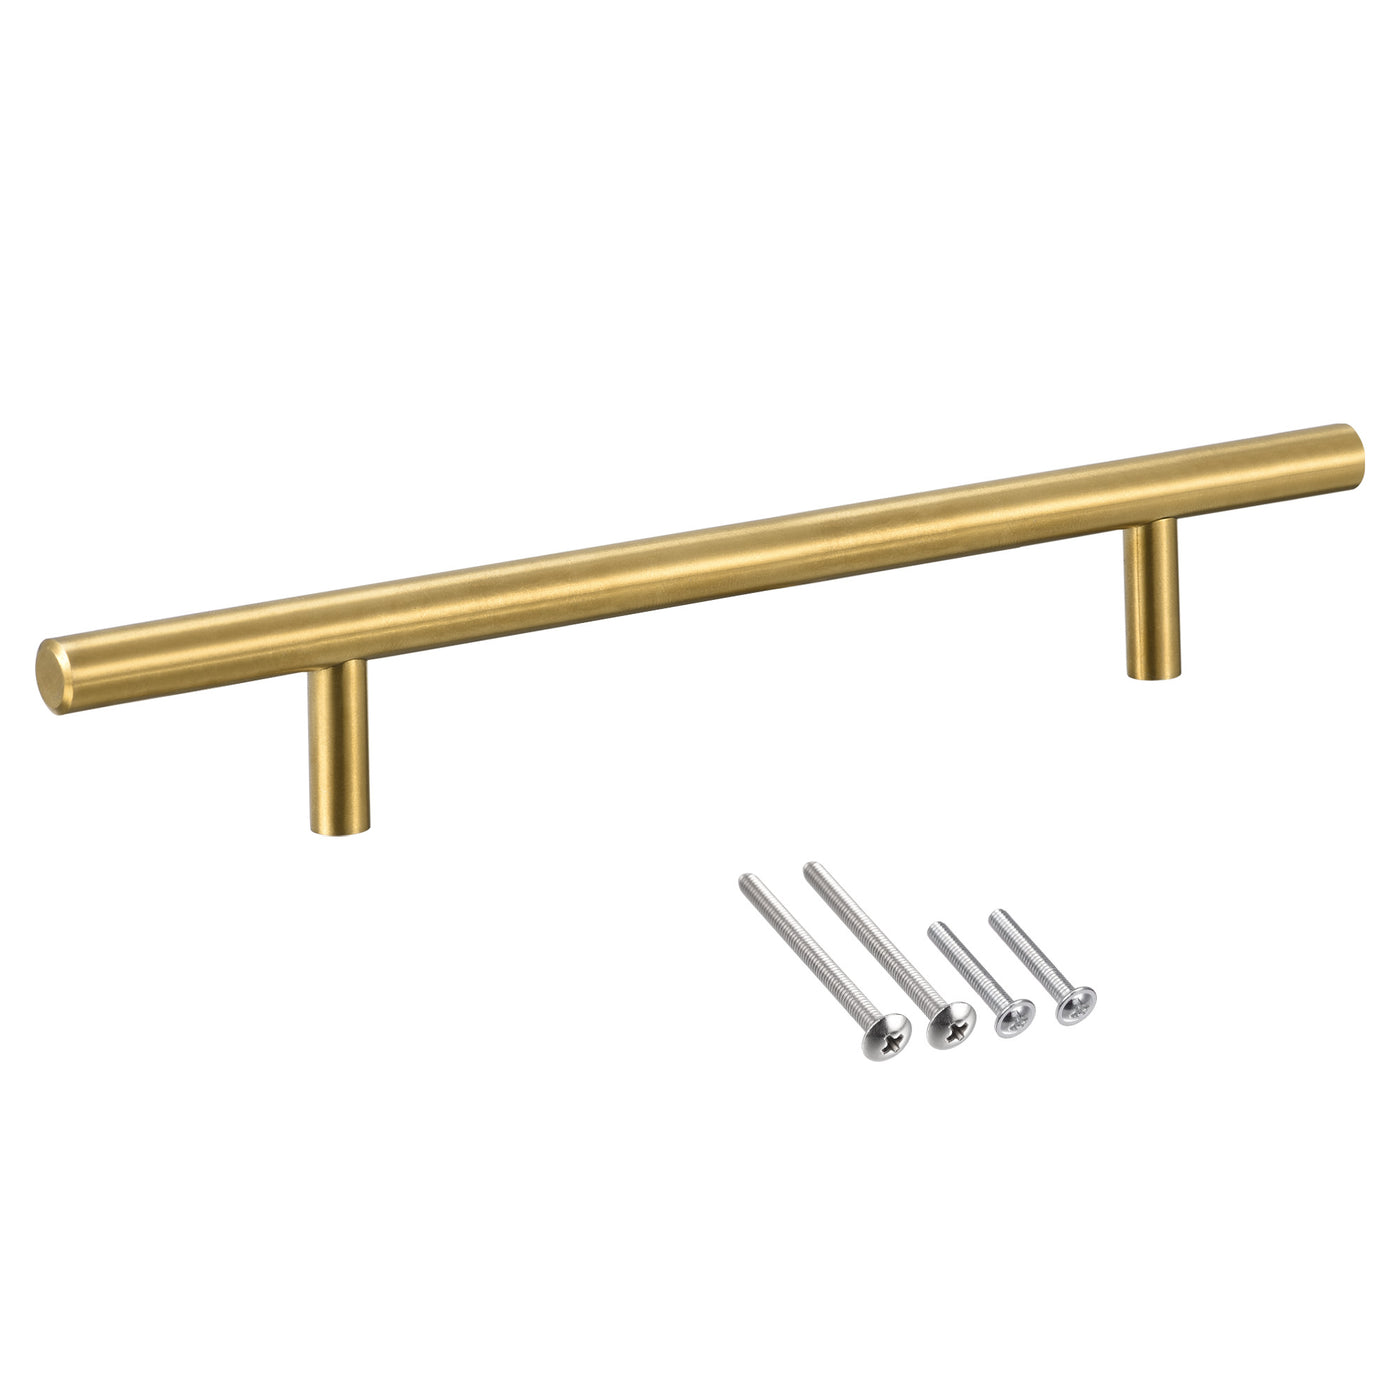 uxcell Uxcell T Bar Pull Handle, 10"(250mm) Length 10mm Dia Stainless Steel Cabinet Pulls 6.3"(160mm) Hole Center Distance Gold Tone 2pcs